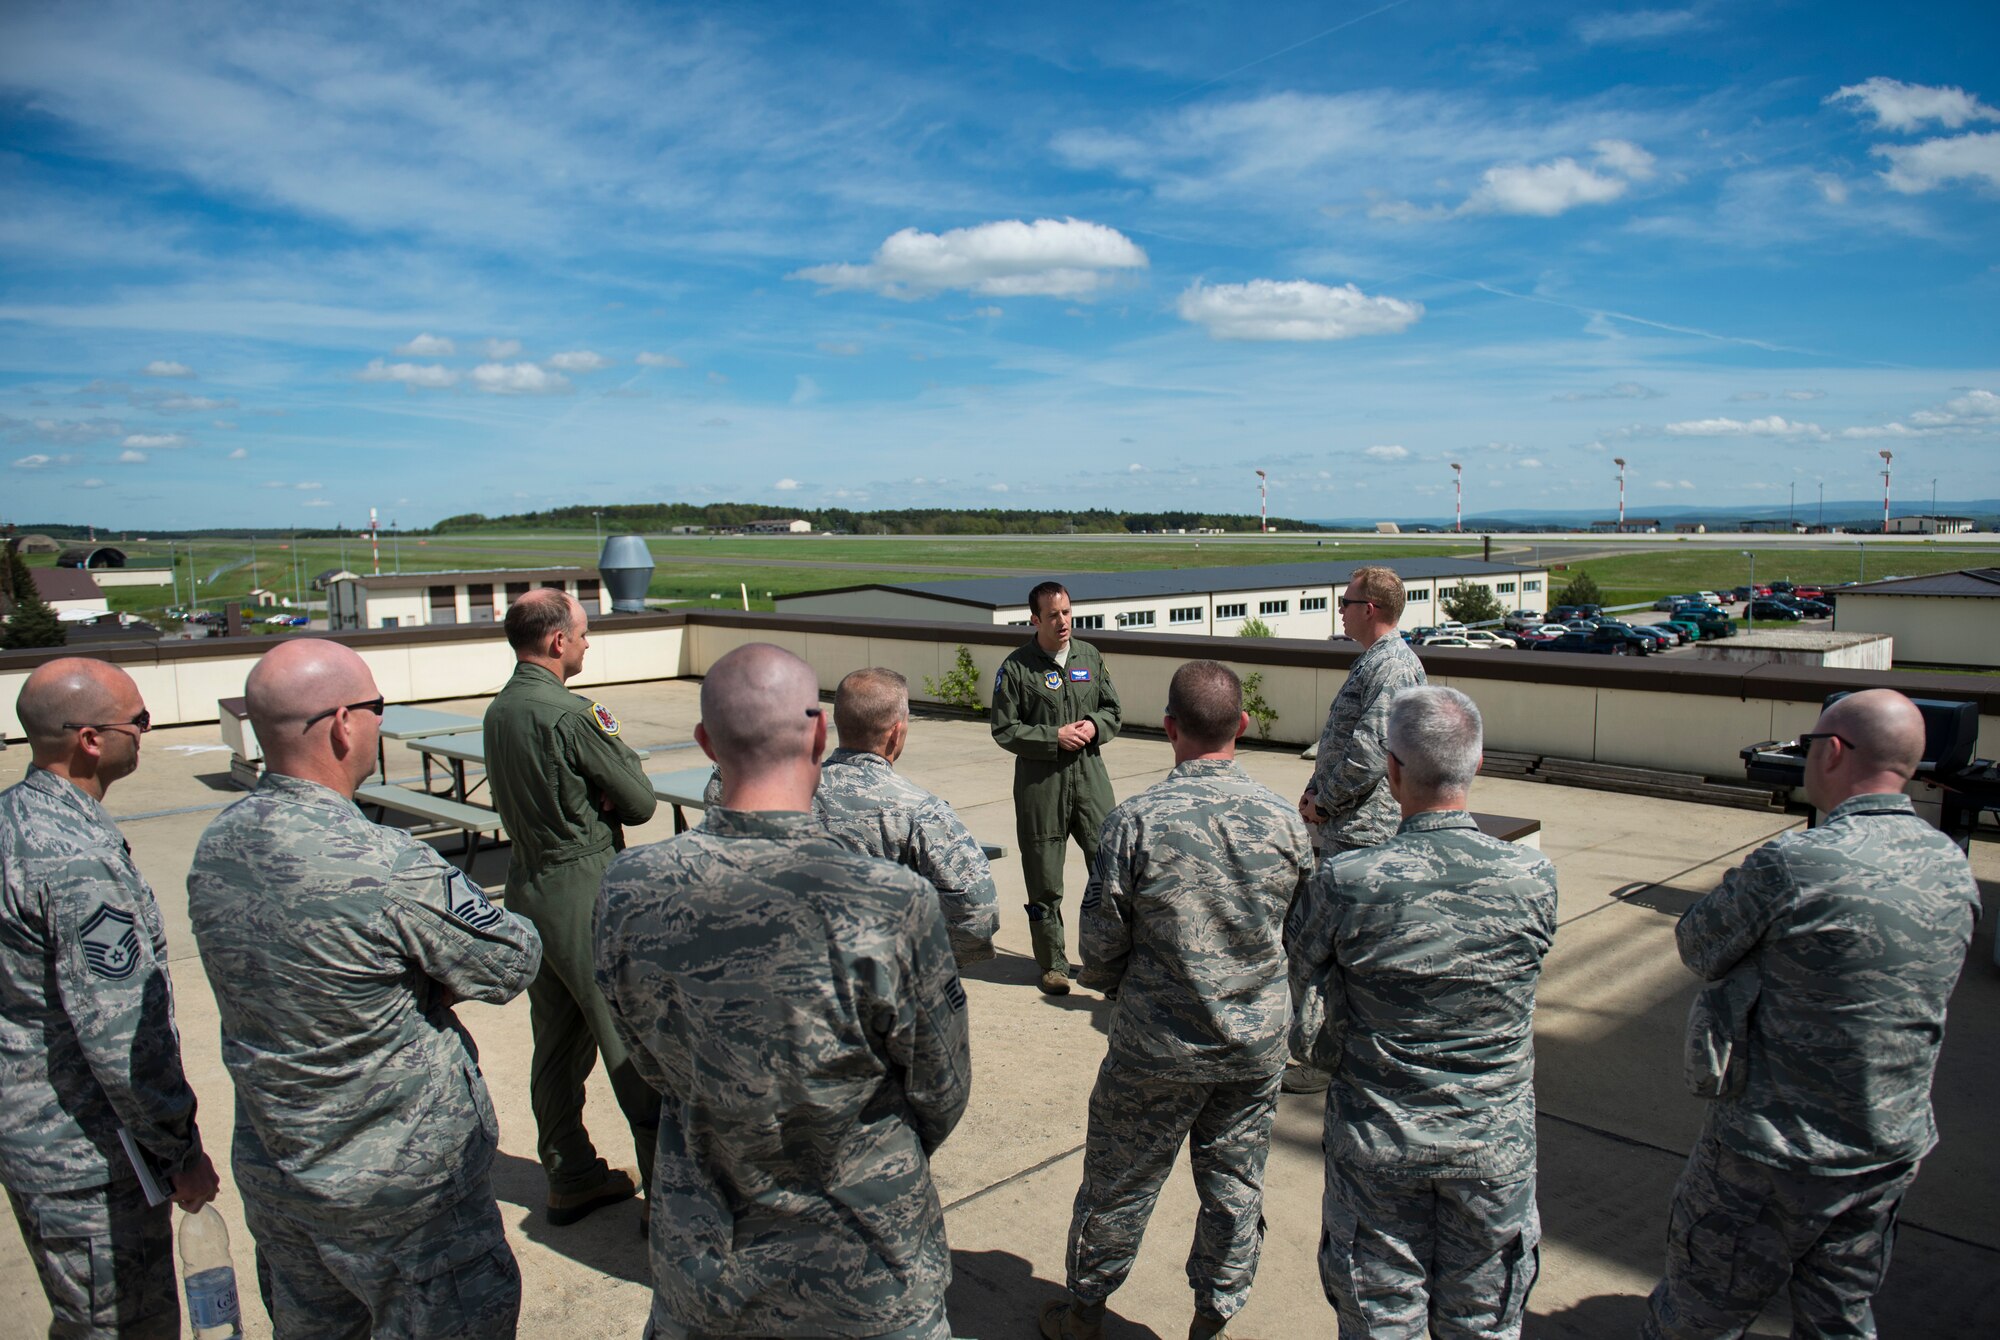 U.S. Air Force Lt. Col. Ryan Nudi, 52nd Fighter Wing chief of safety, center, addresses wing leadership before the group participated in a demonstration of the base’s wildlife management programs at Spangdahlem Air Base, Germany, May 4, 2015. The programs include trapping, hunting, falconry and clearing of nests. (U.S. Air Force photo by Airman 1st Class Luke Kitterman/Released)